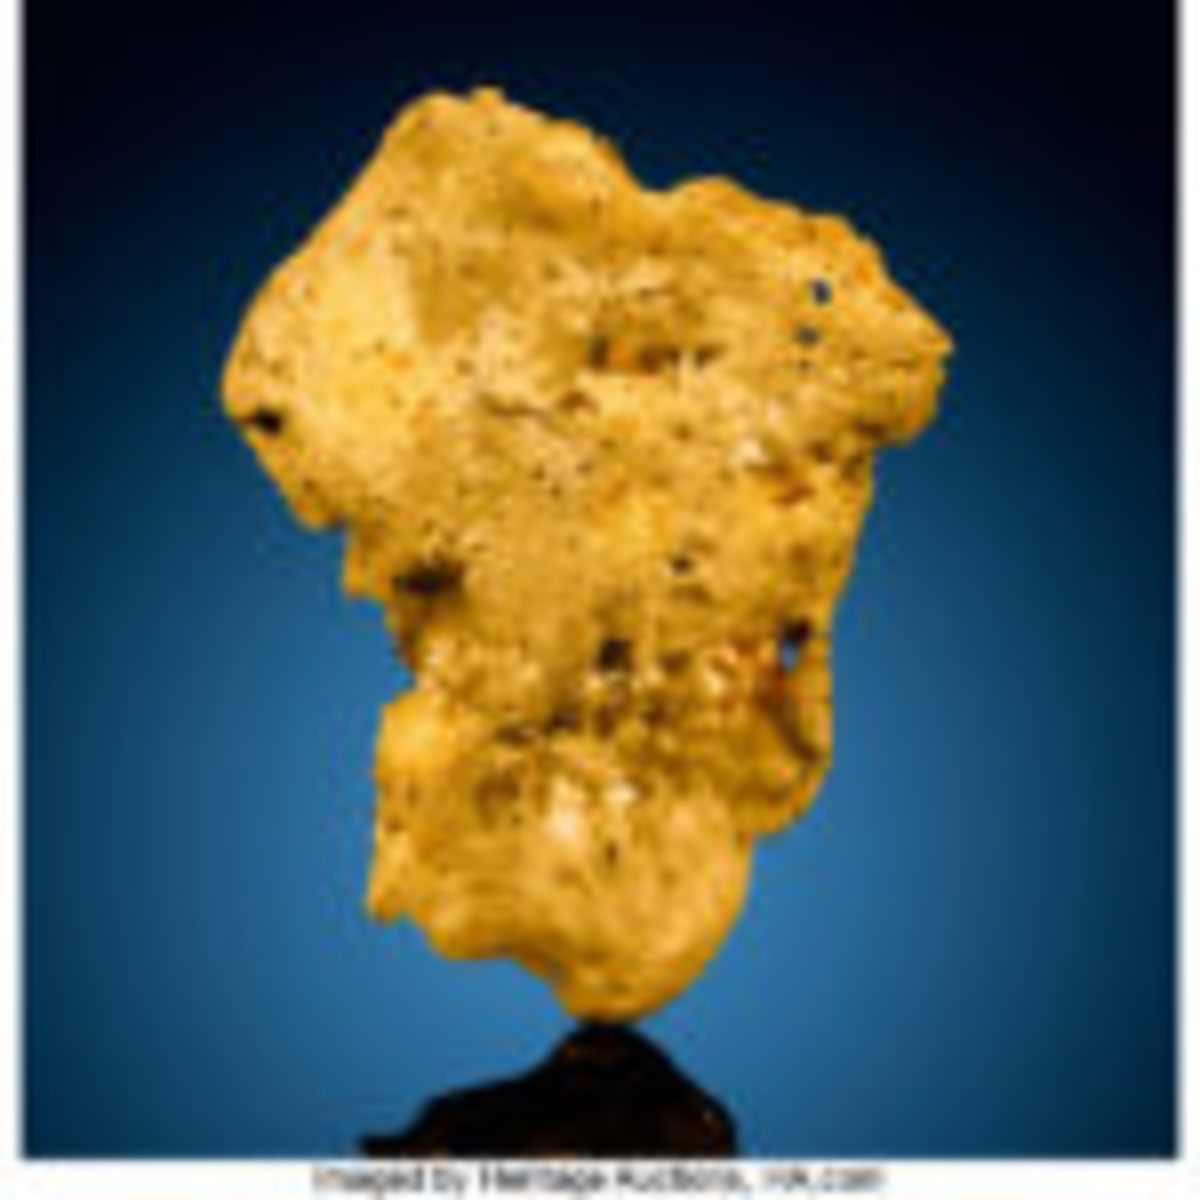 "Aussie" gold nugget, 382.7 grams (12.3 troy ounces), exhibiting a duality of tone as a "skin" of yellow covers the mass of gold in areas affording a layered effect to its overall luster, 2.69 x 2.20 x 0.76 inches, $20,000-$30,000. 